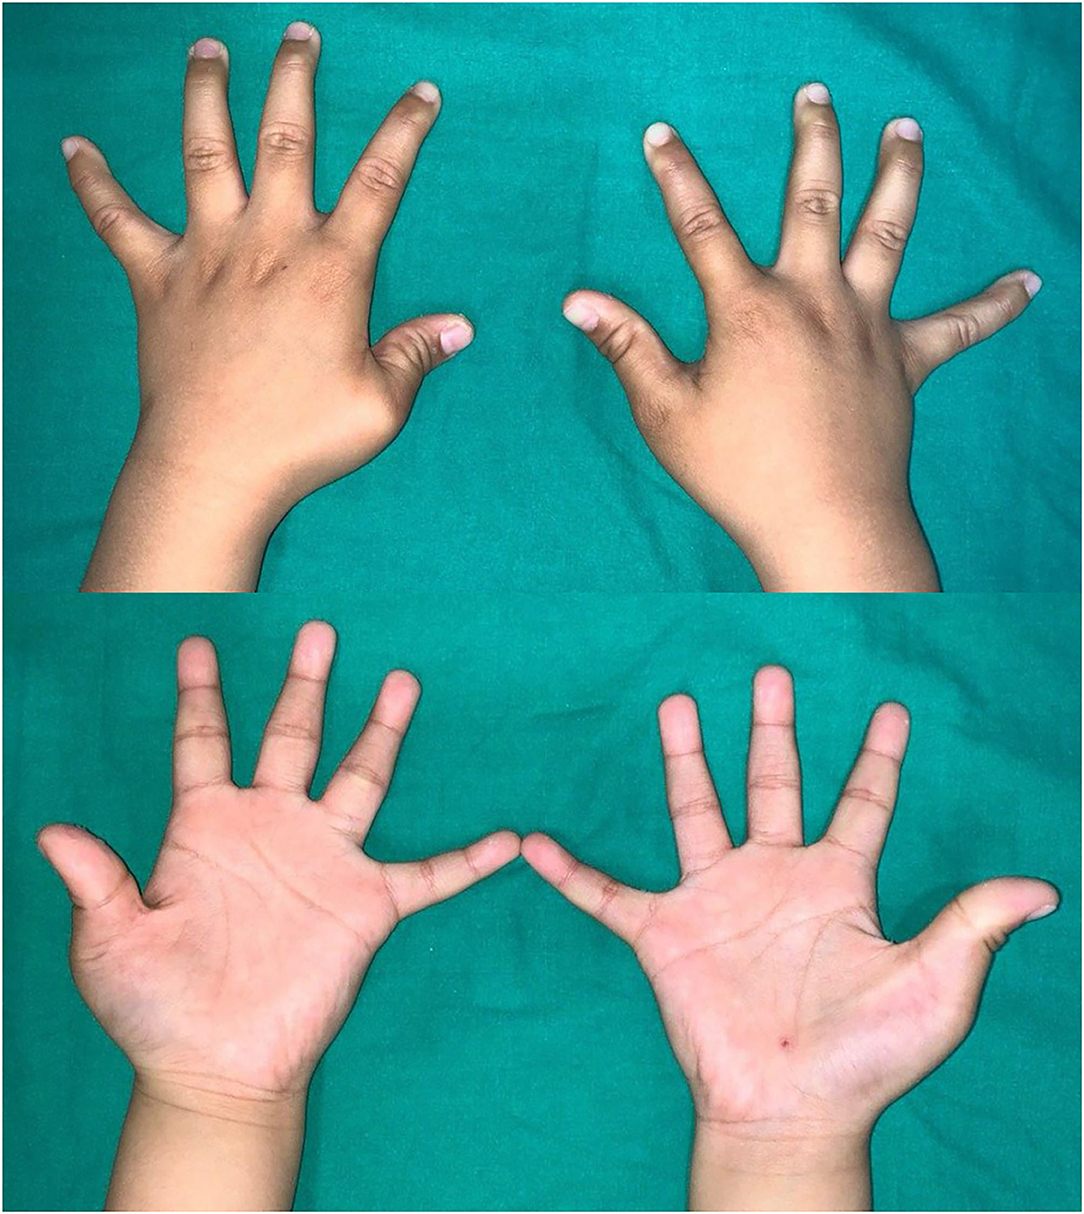 What are the causes of and treatments for deformed fingers?